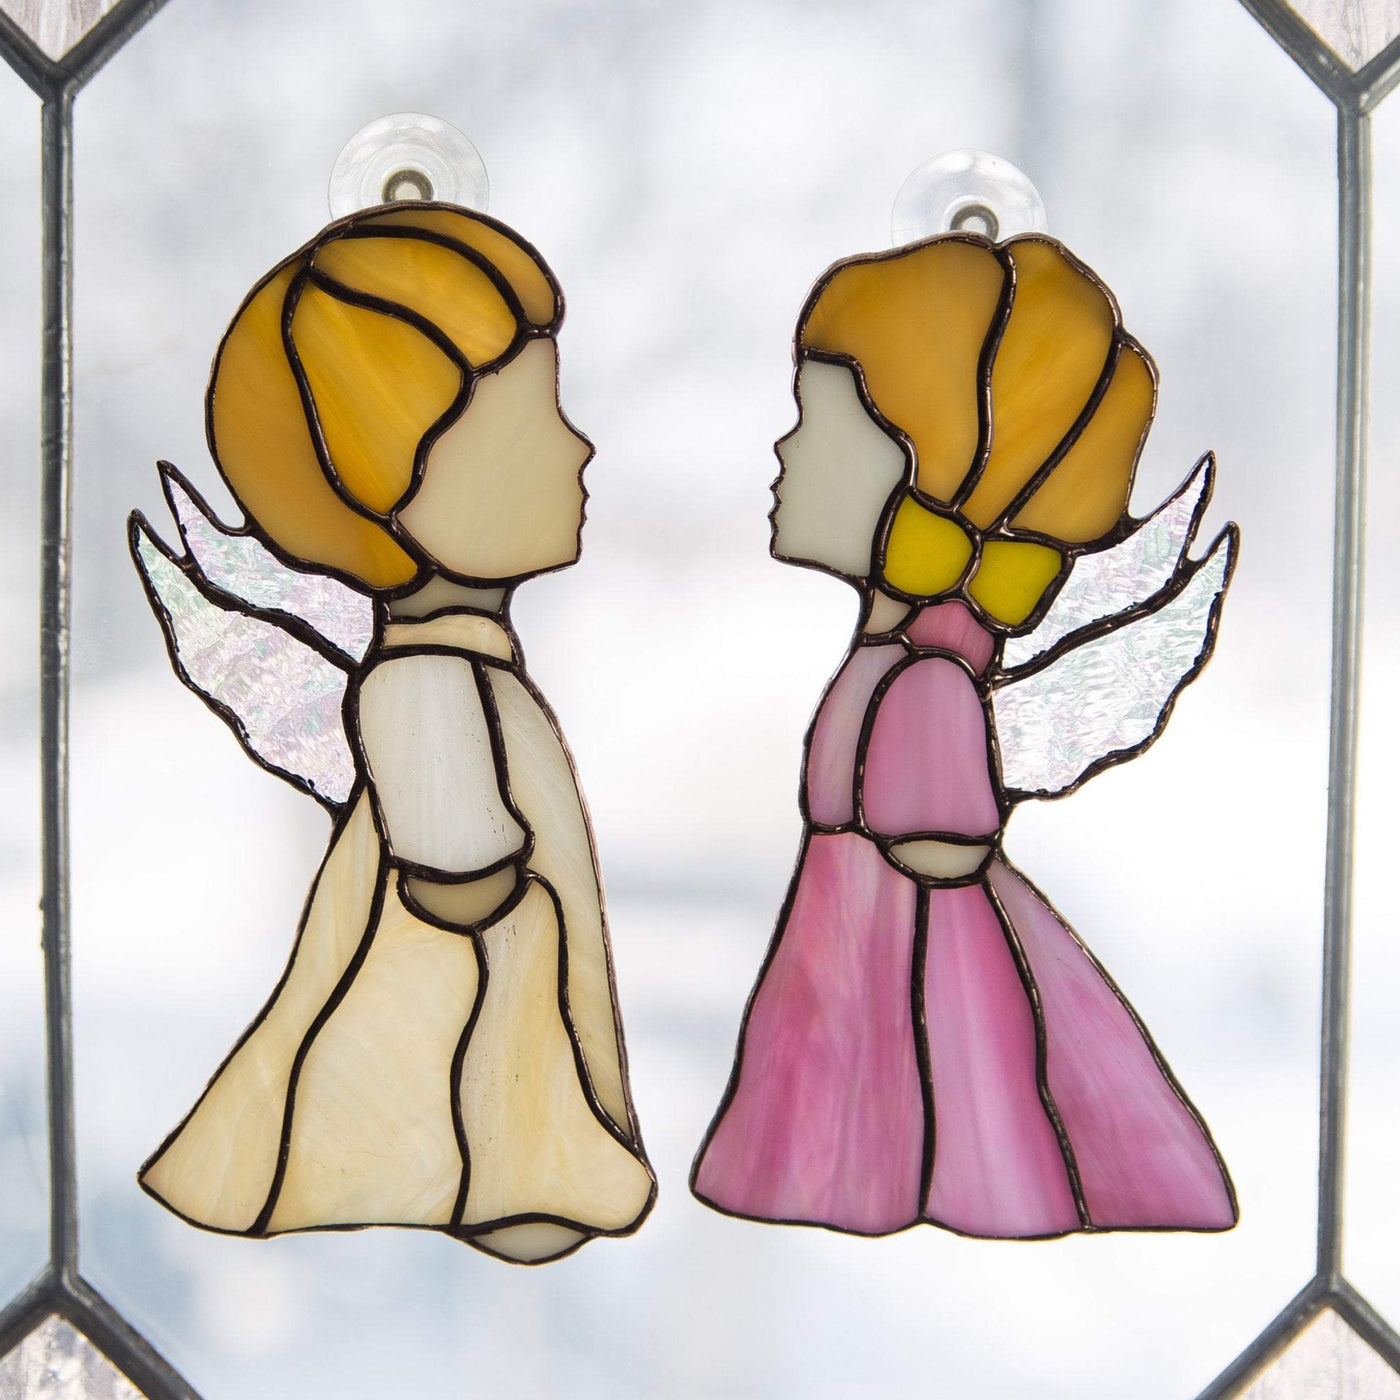 Hanging stained glass window "Pair of Angels"